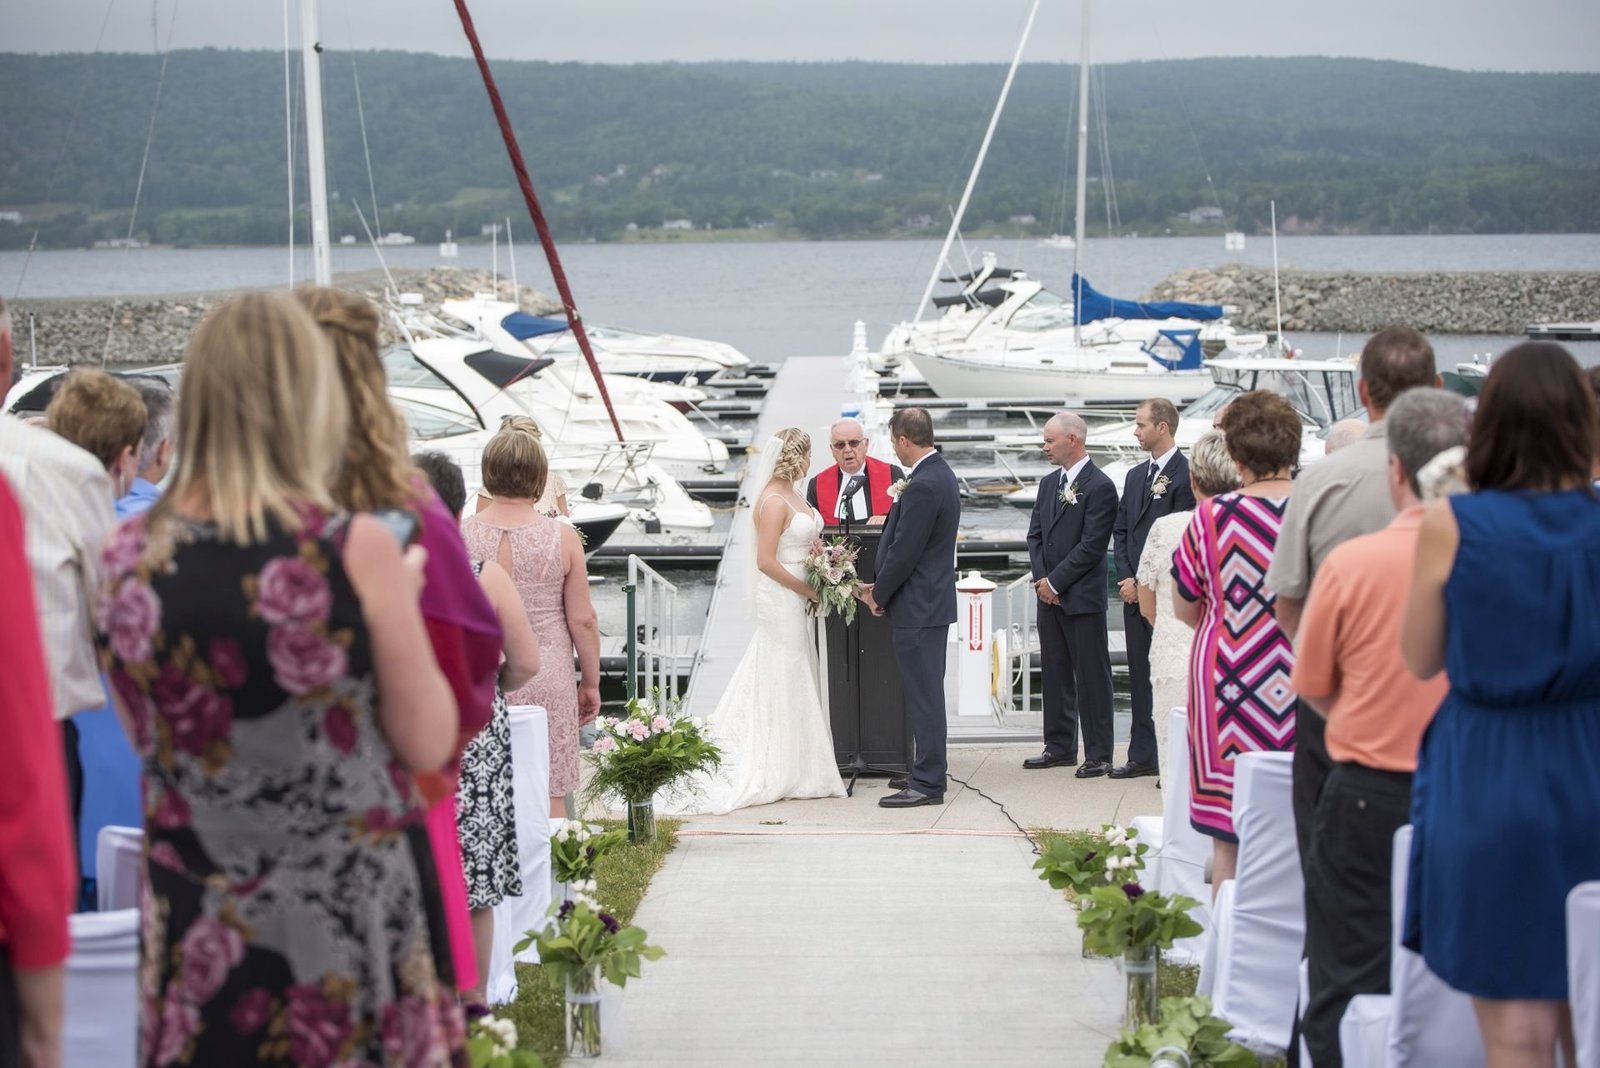 Ben Eoin Yacht Club Wedding - Erica and Andrew